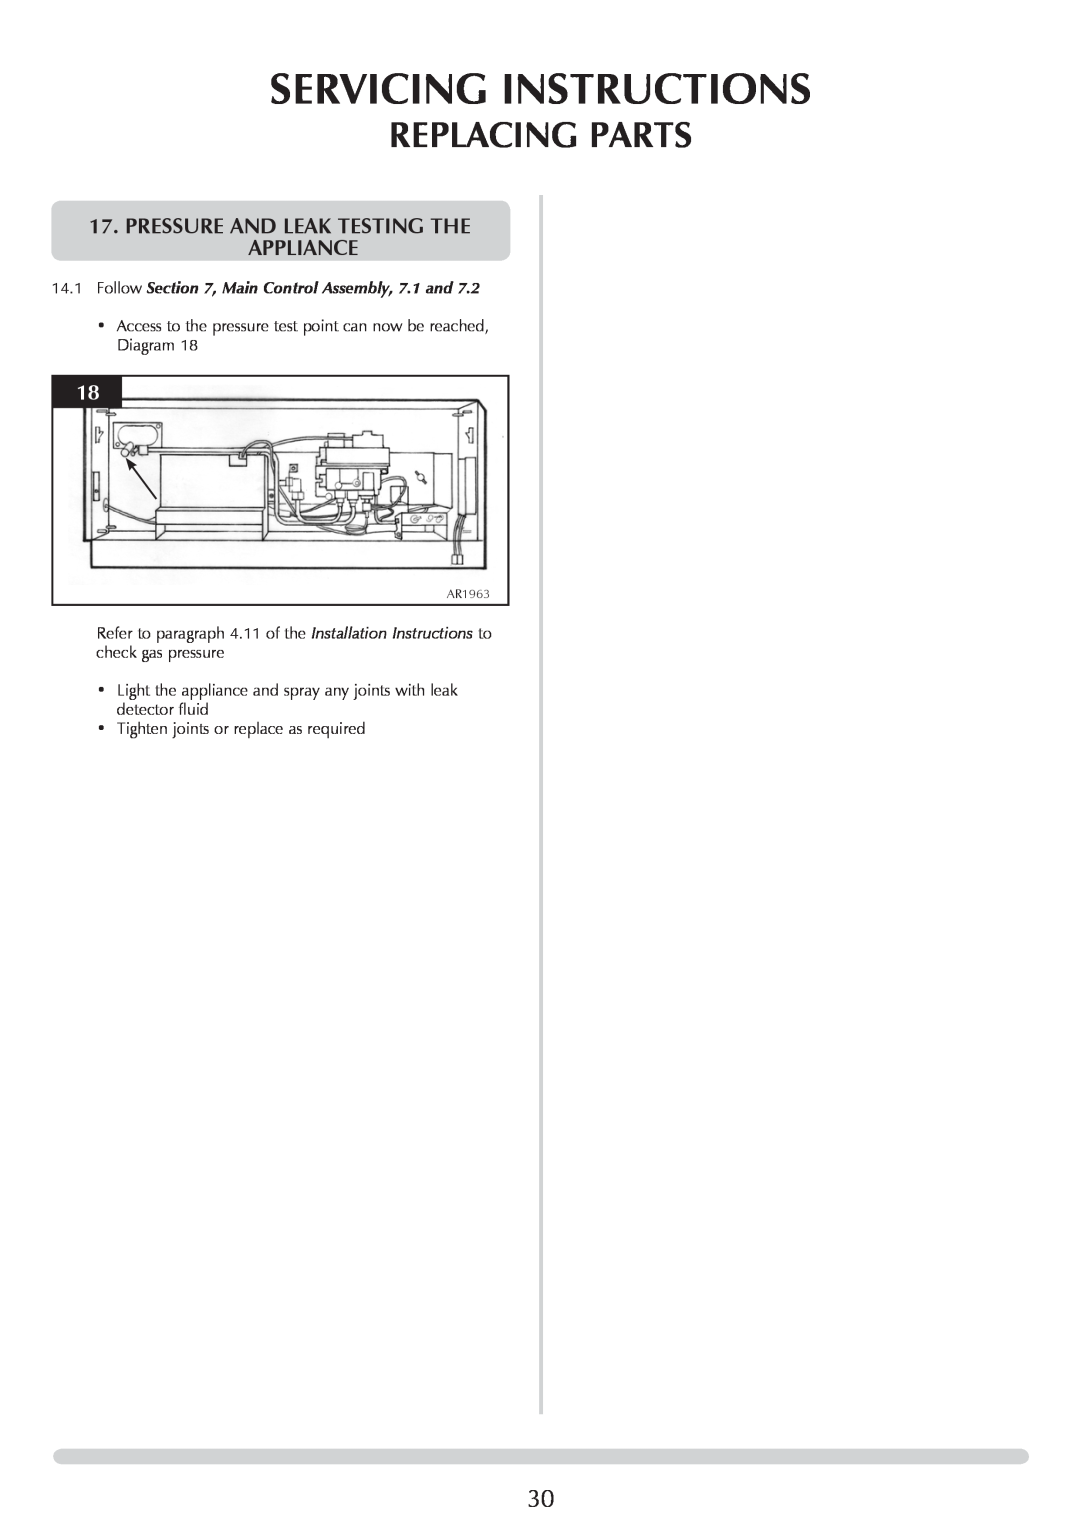 Stovax P8700CFCHEC, P8701CFCHEC manual Servicing Instructions, Replacing Parts, Pressure And Leak Testing The Appliance 